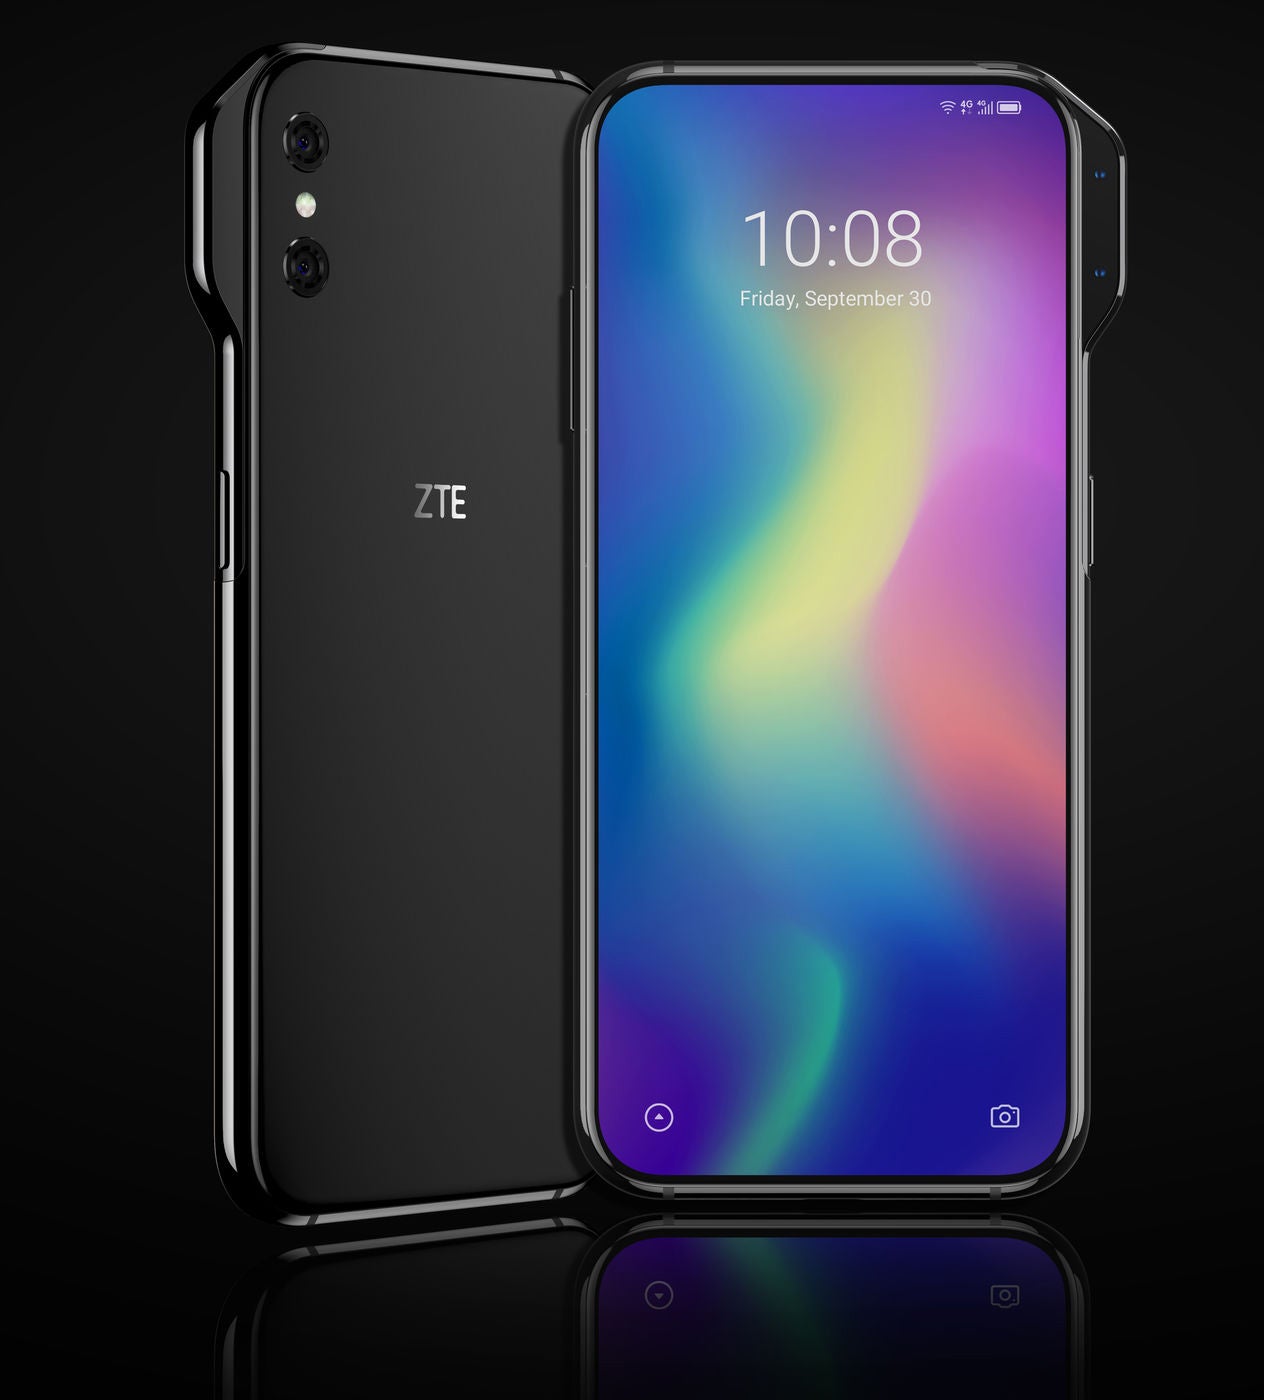 ZTE Axon V render reveals a dedicated panel that hosts the front-facing cameras - Renders show two new ZTE concept phones that are practically all screen